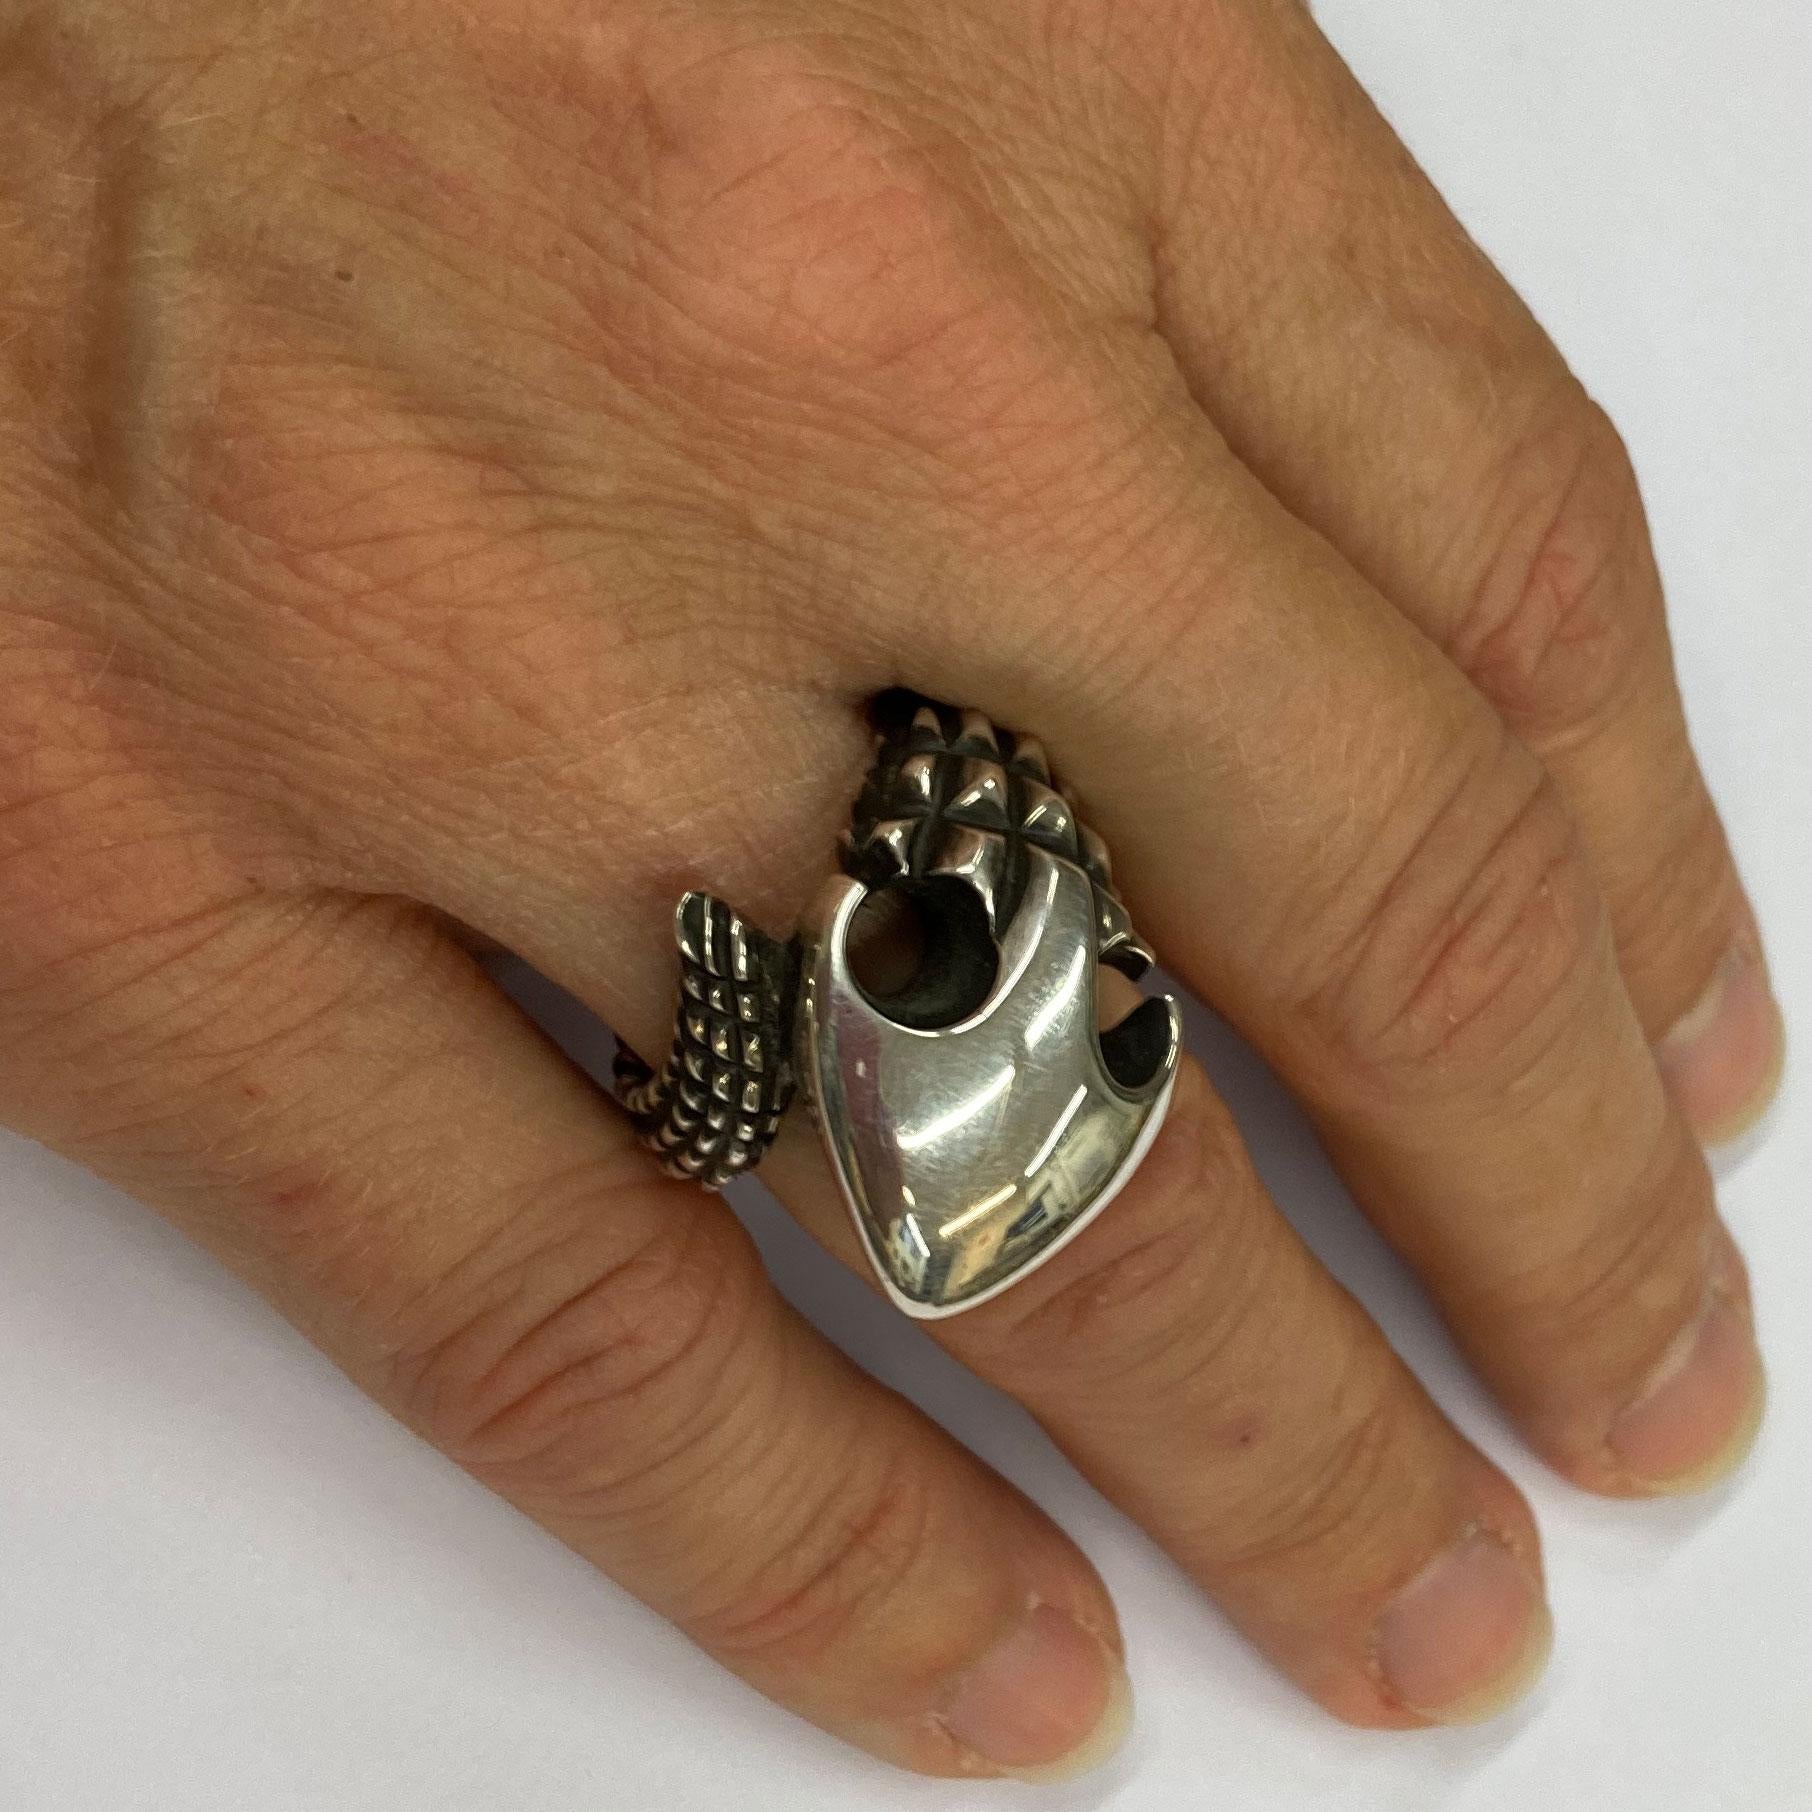 Solid Sterling Ring in a crazy wild look! The three-dimensional design evokes a strong contrast between light and shadow. 
An elegant and snakelike motion around your finger.
Size 17 / 8 . The Ring can be resized smaller or bigger.
This extravagant